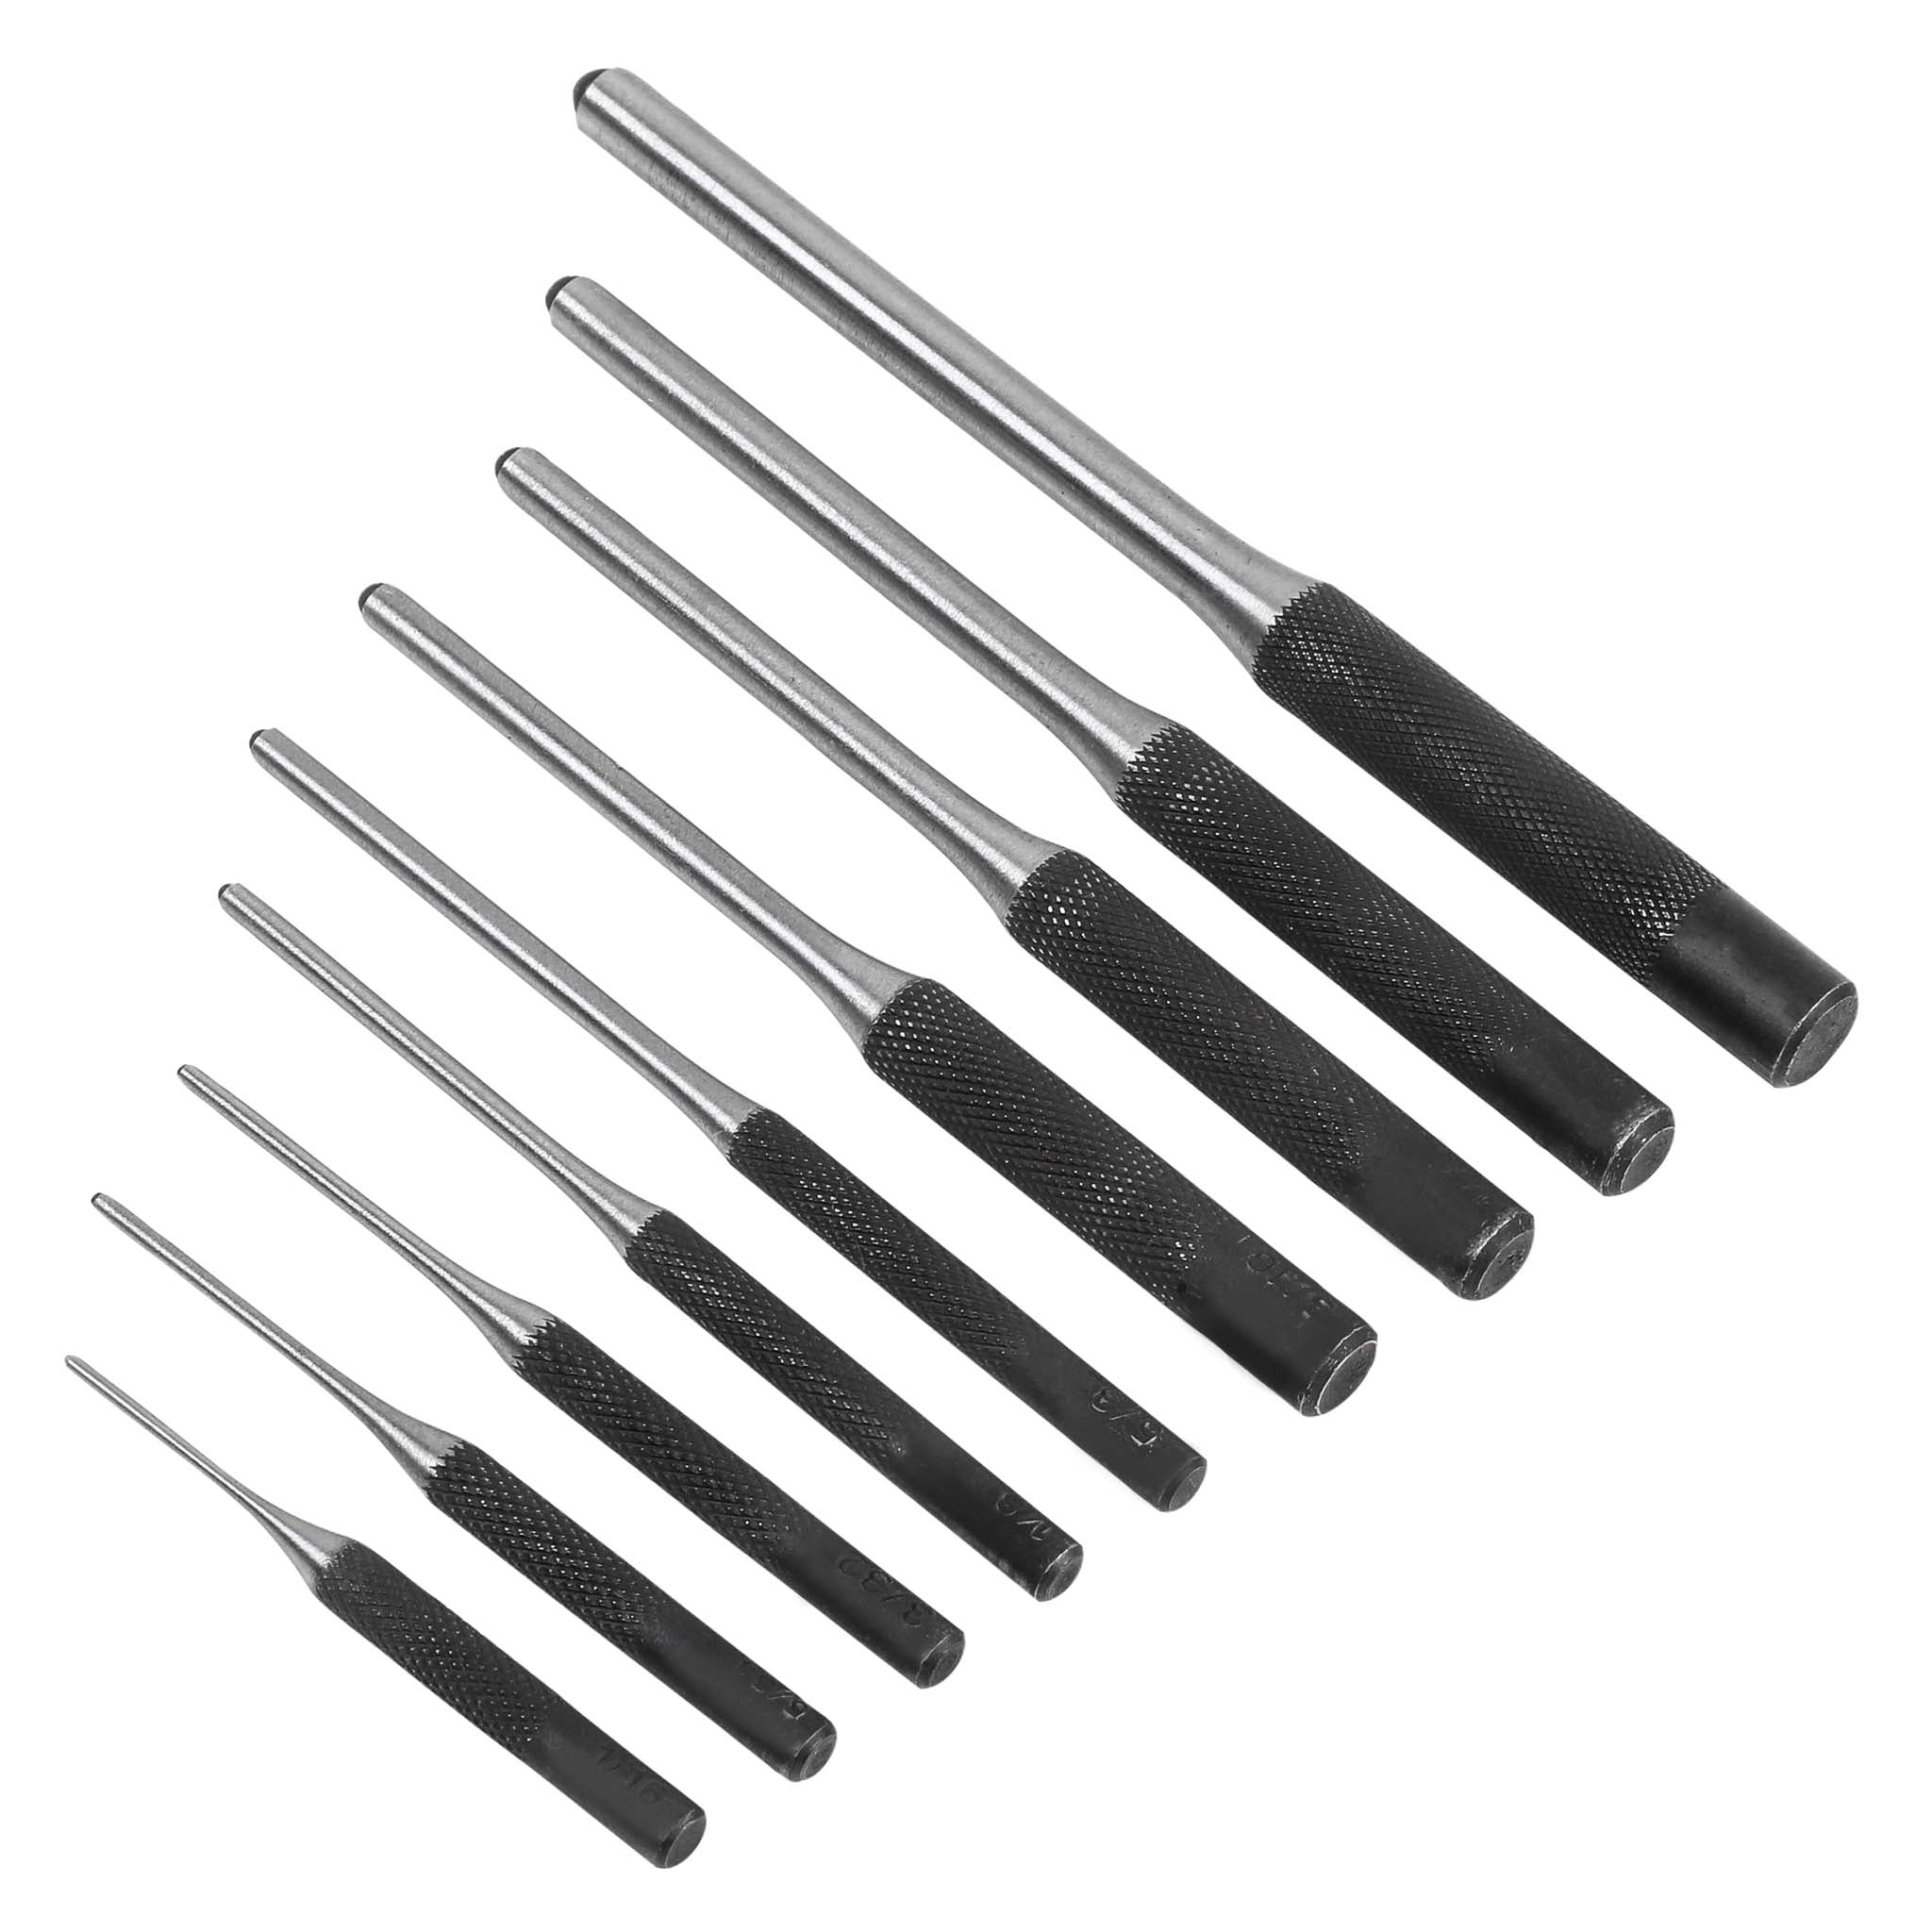 Carevas 9 Pieces Roll Pin Punch Set Steel Punches Hand Pin